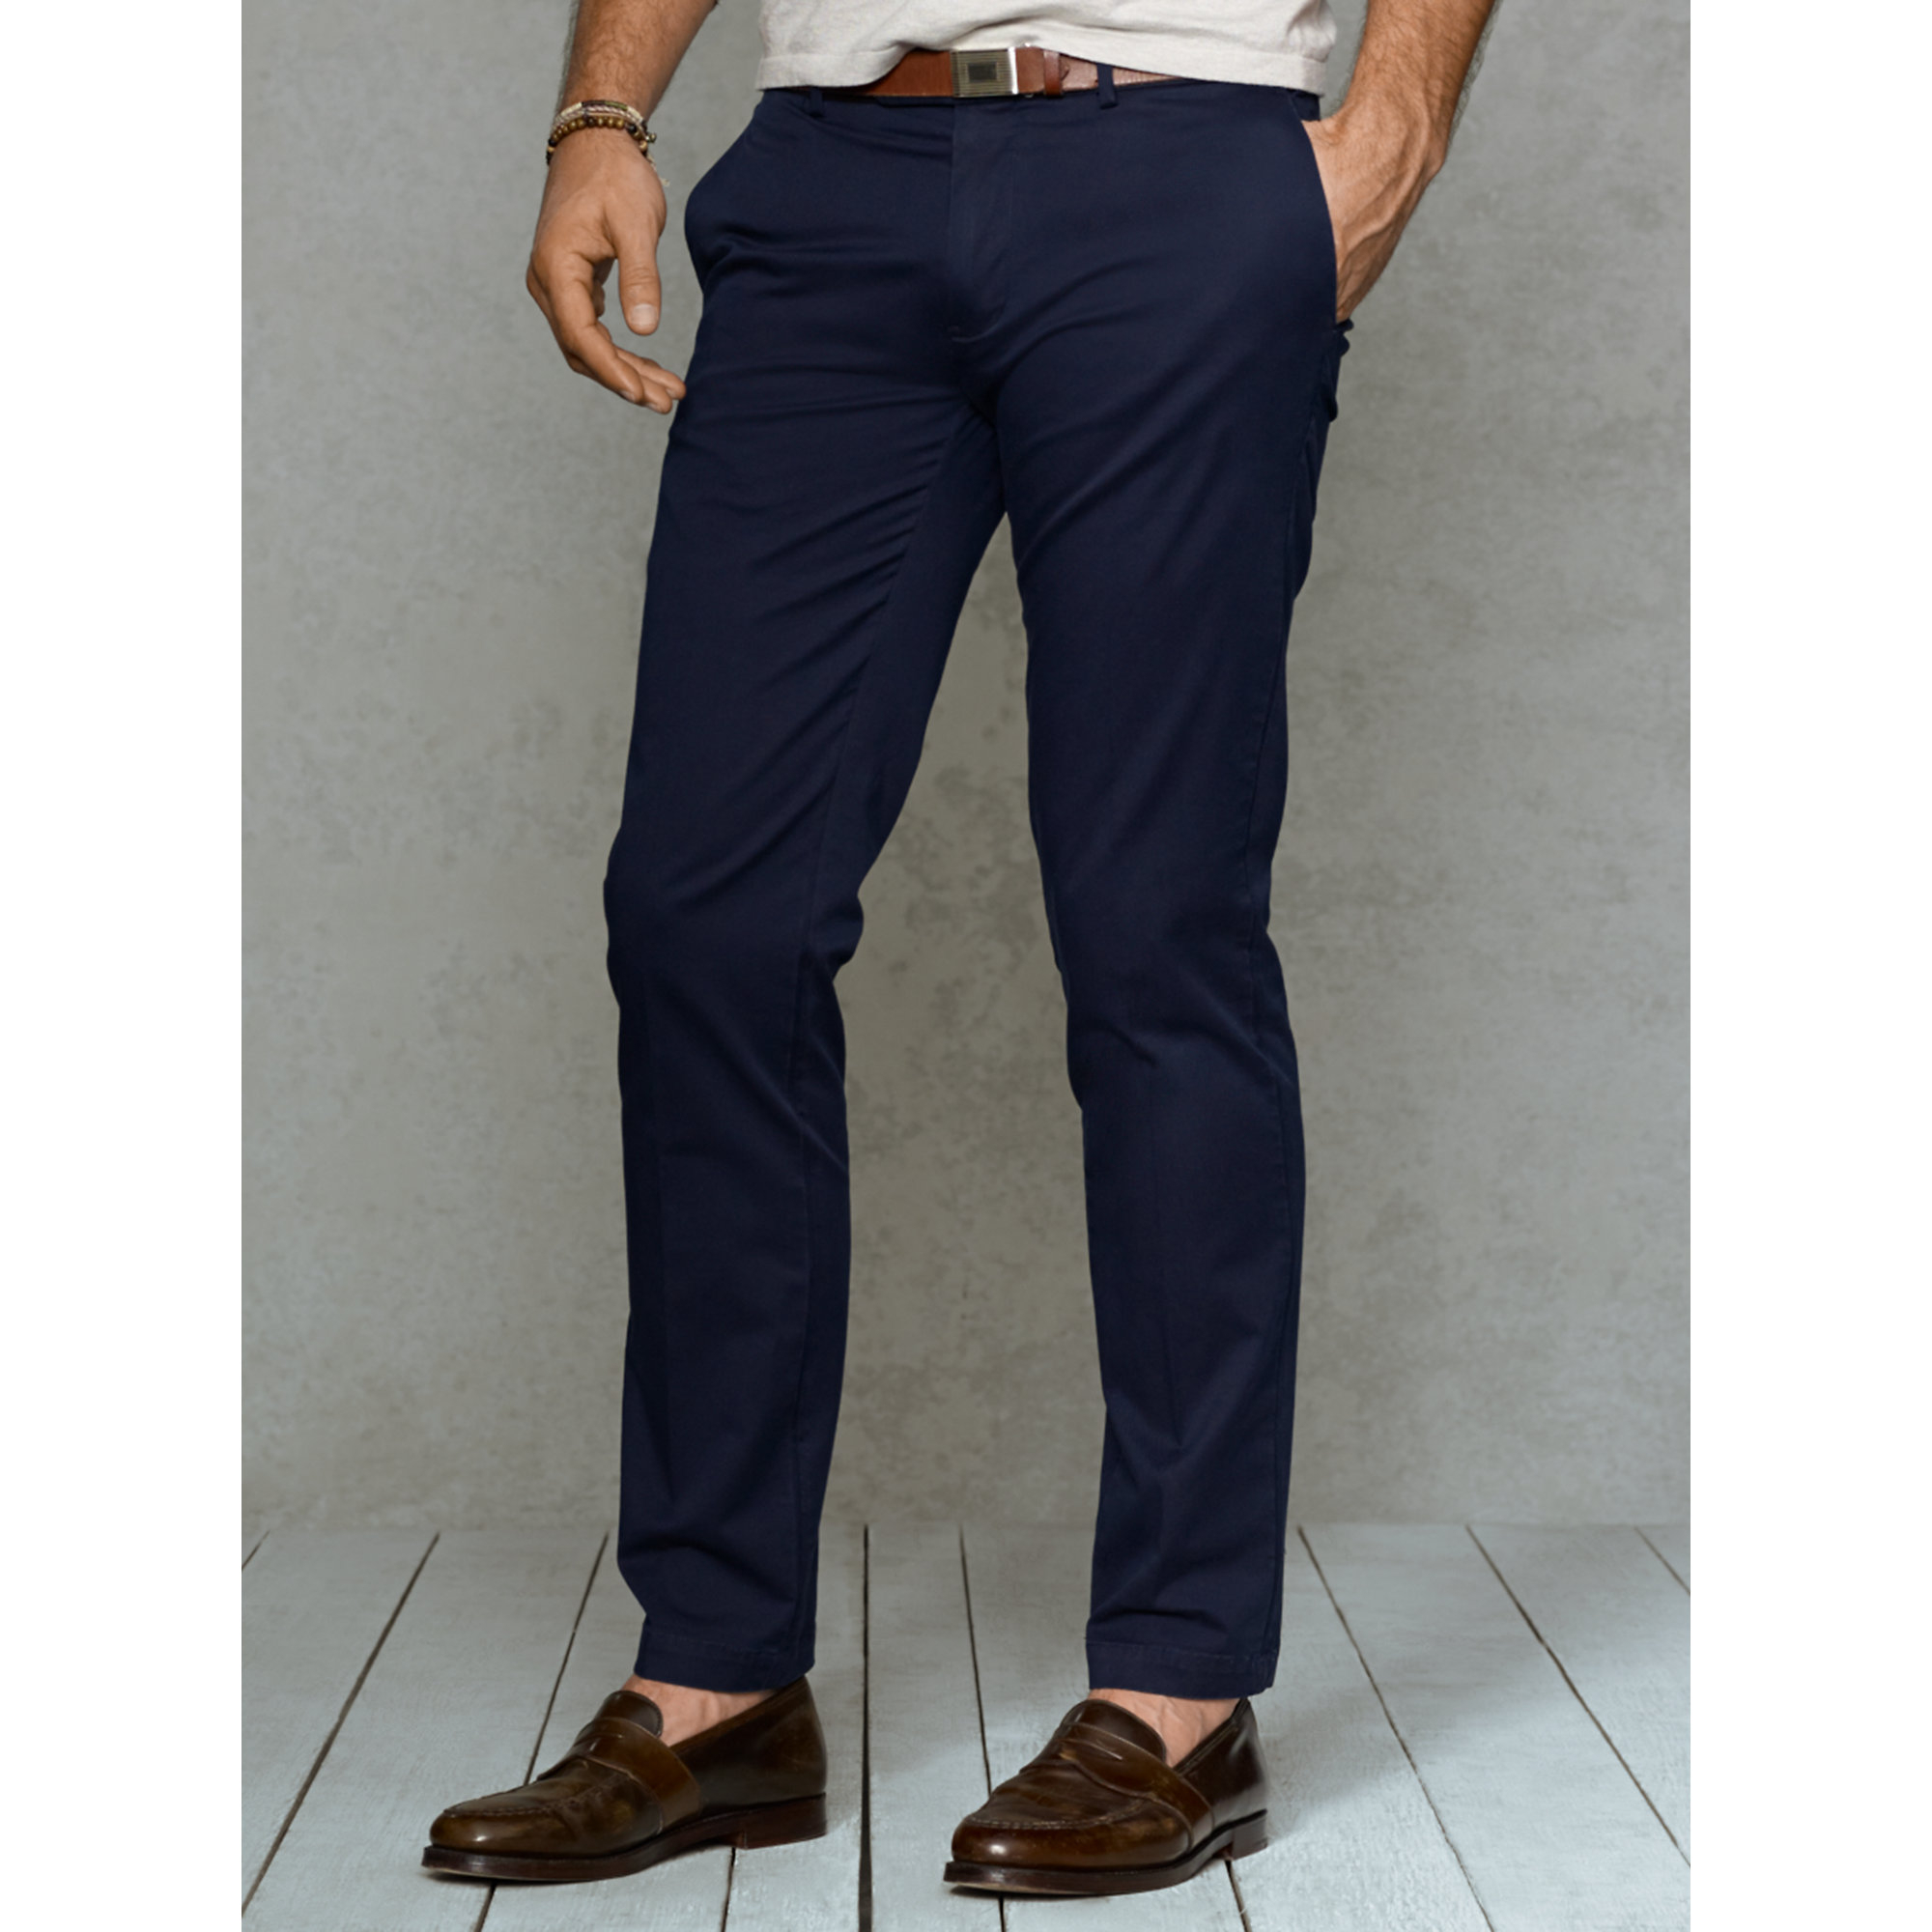 Buy > polo ralph lauren stretch slim fit chino > in stock